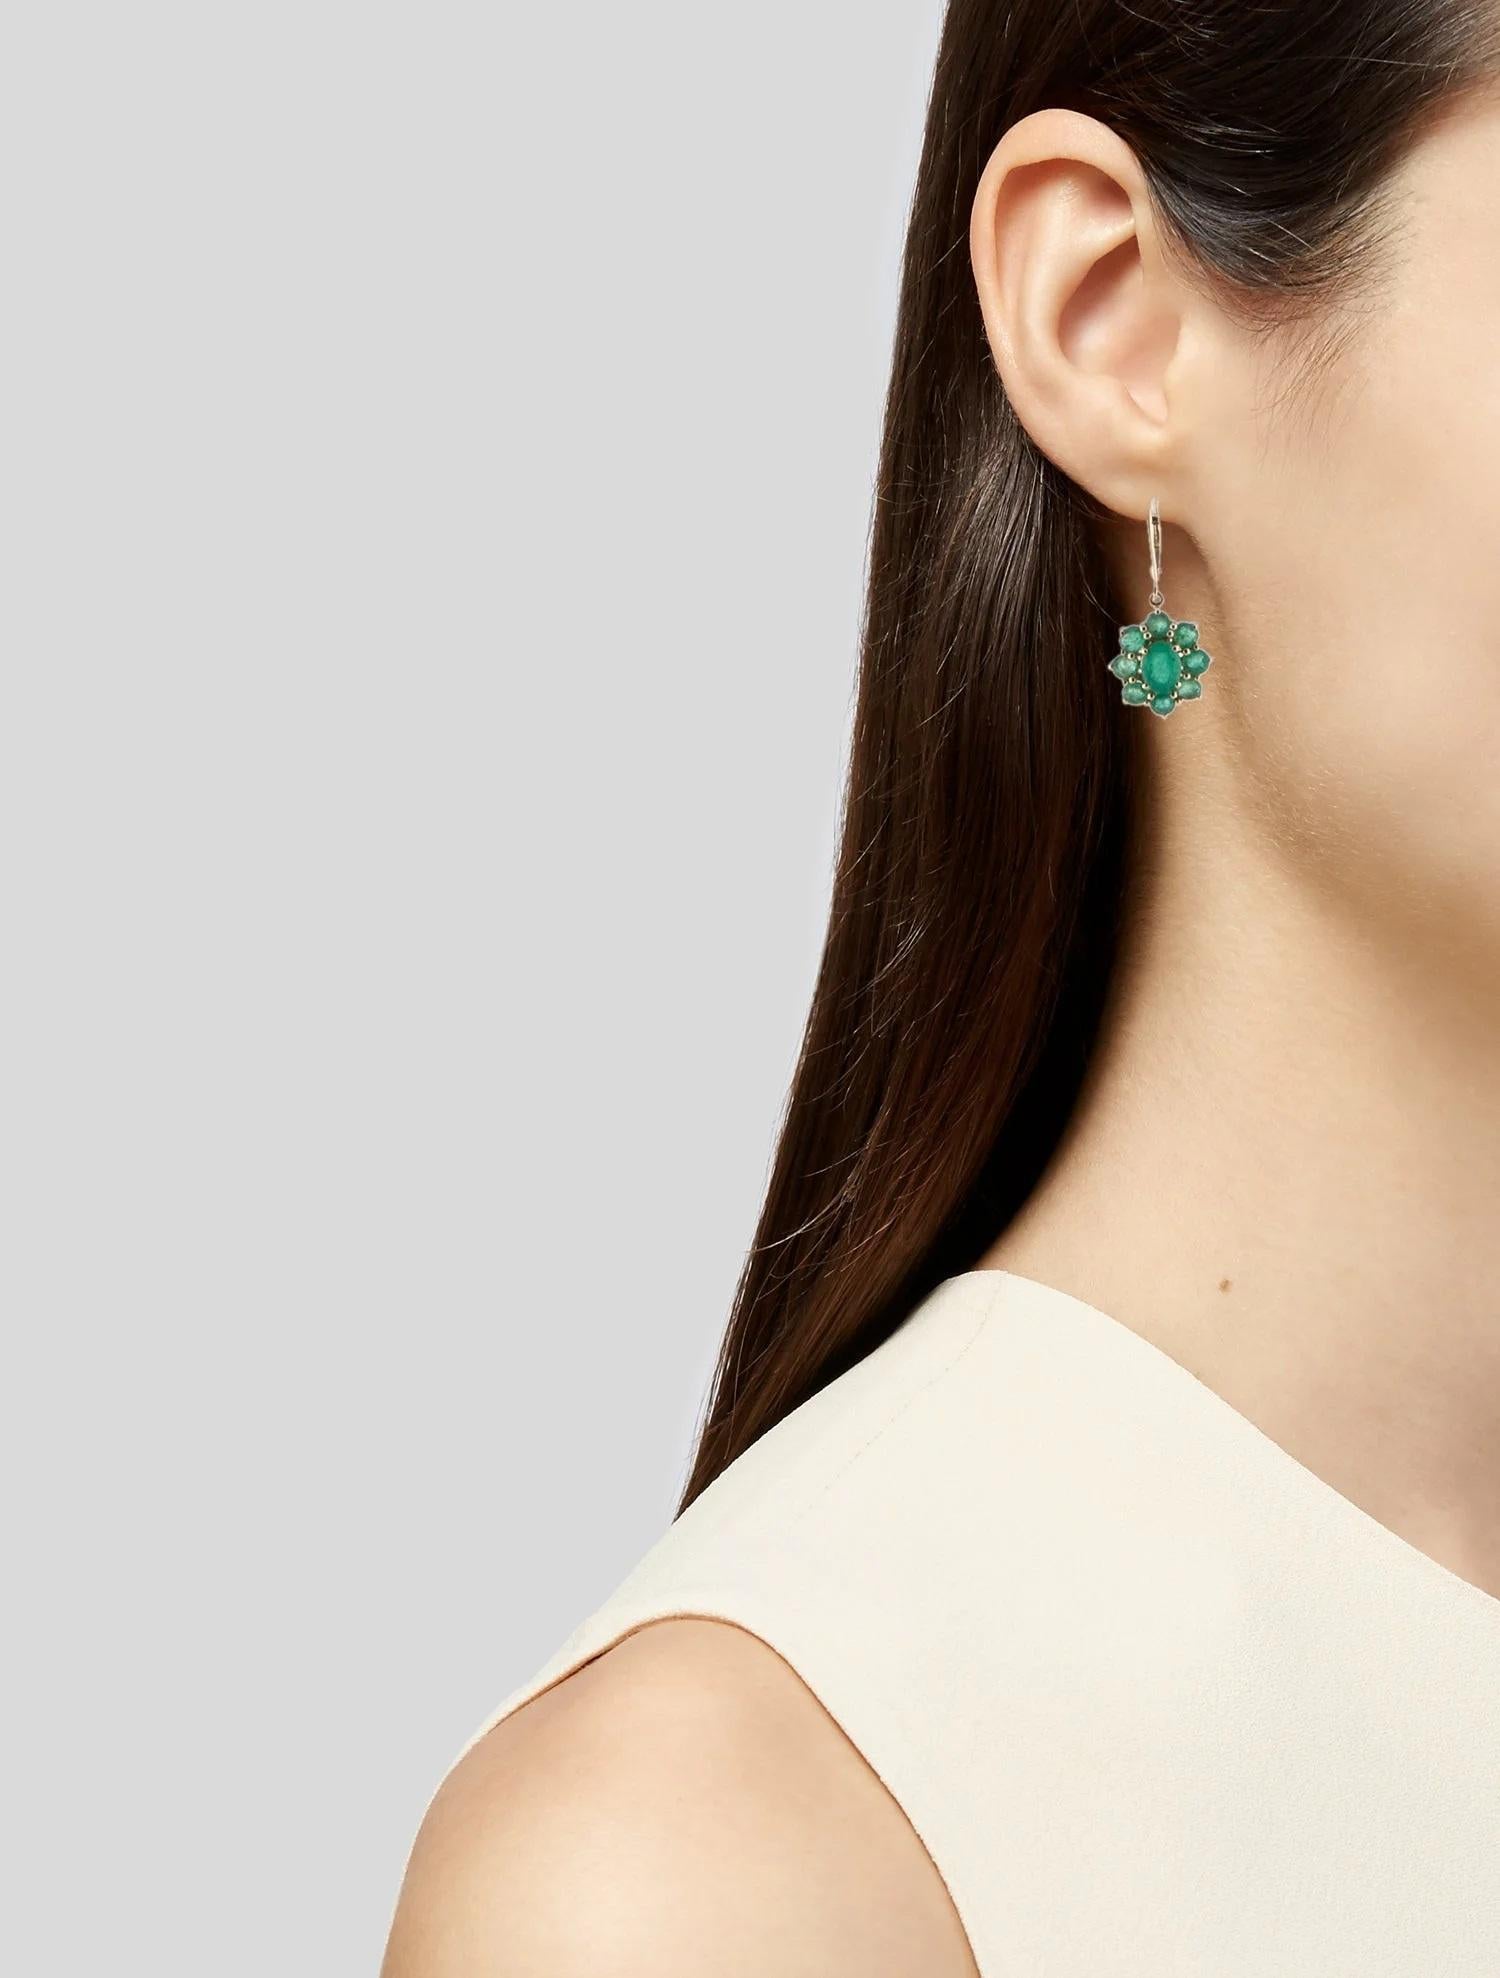 Elevate your style with these exquisite 14K Emerald Drop Earrings. Crafted in luxurious yellow gold, these earrings feature a captivating combination of faceted round and oval brilliant emeralds, totaling 3.66 carats and 2.12 carats respectively.